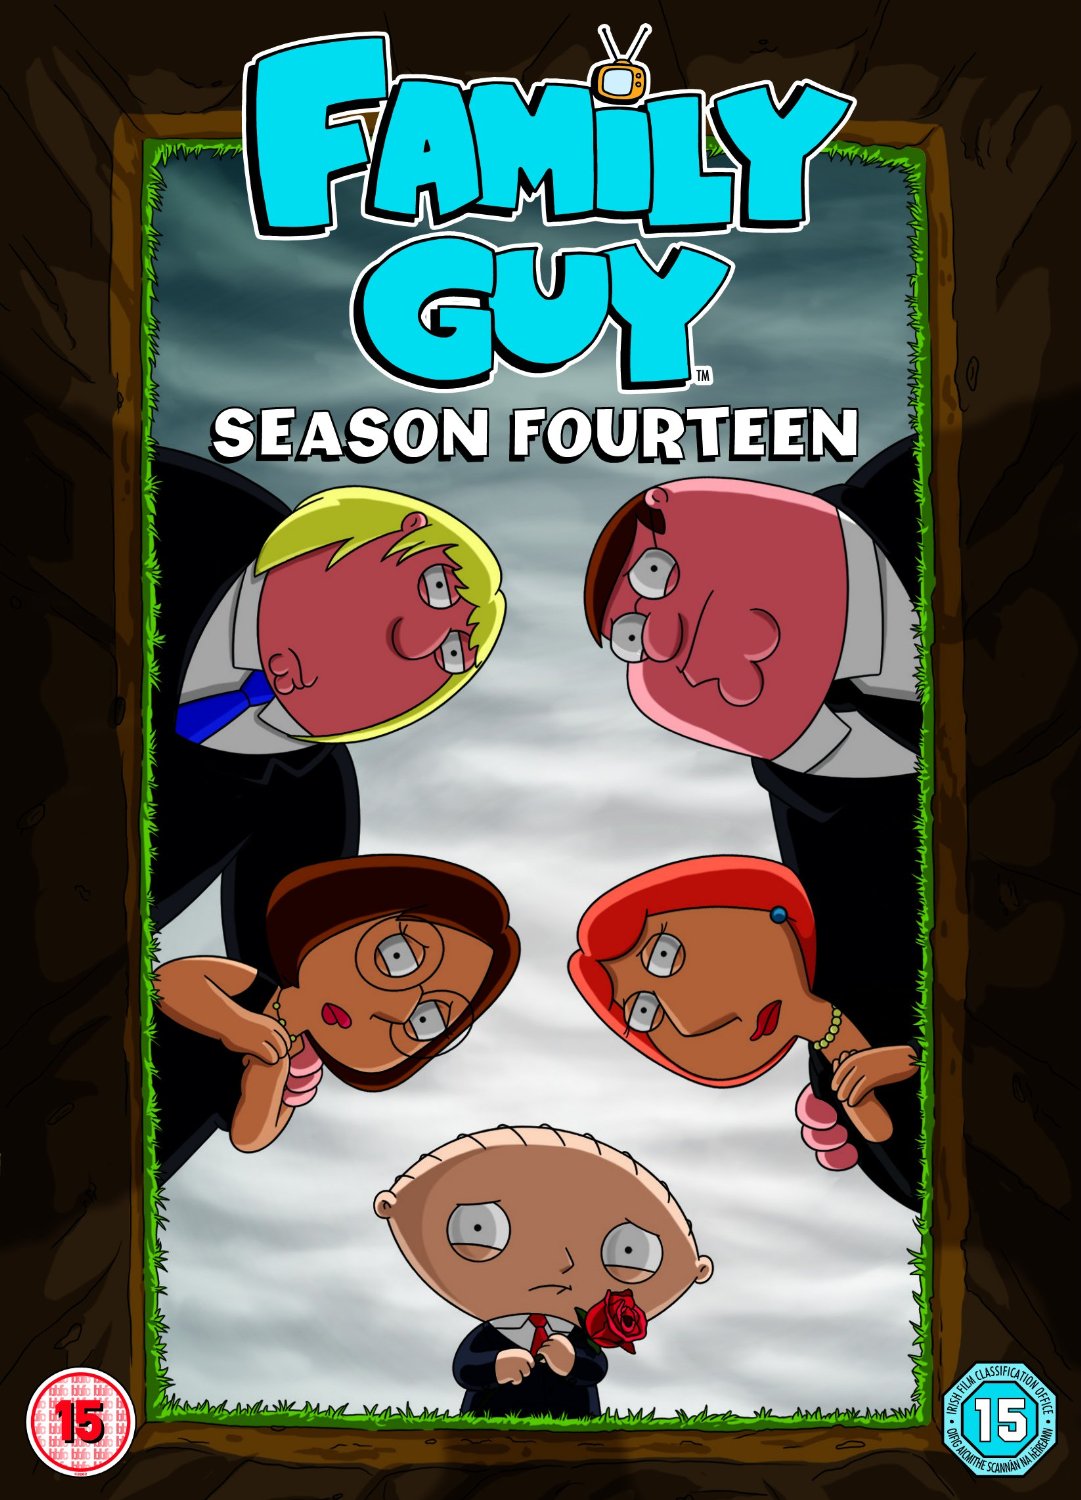 boom competitions - win Family Guy season 14 on DVD